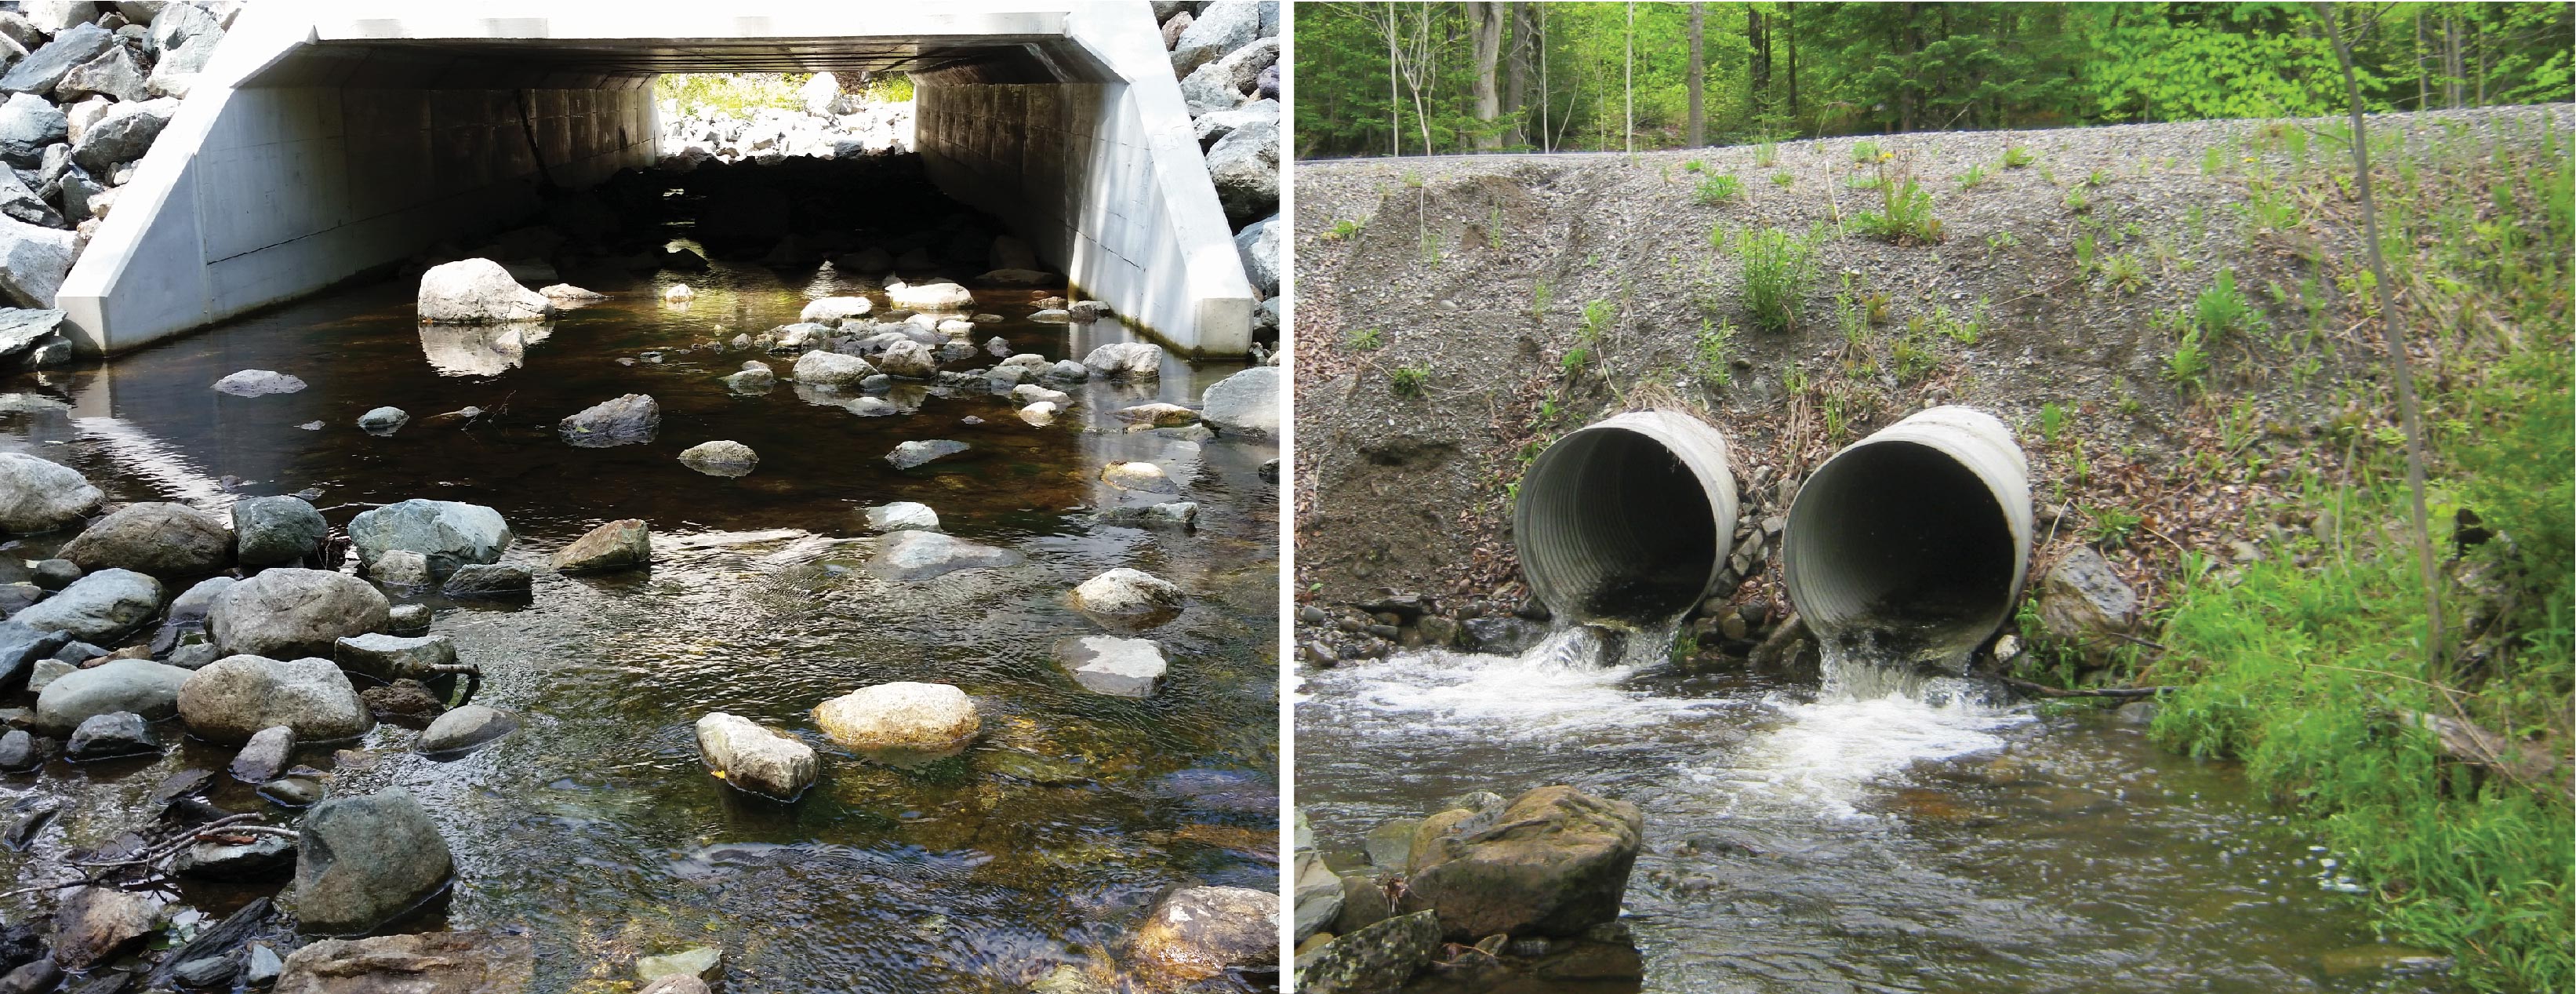 Side by side comparison of bridge and culvert